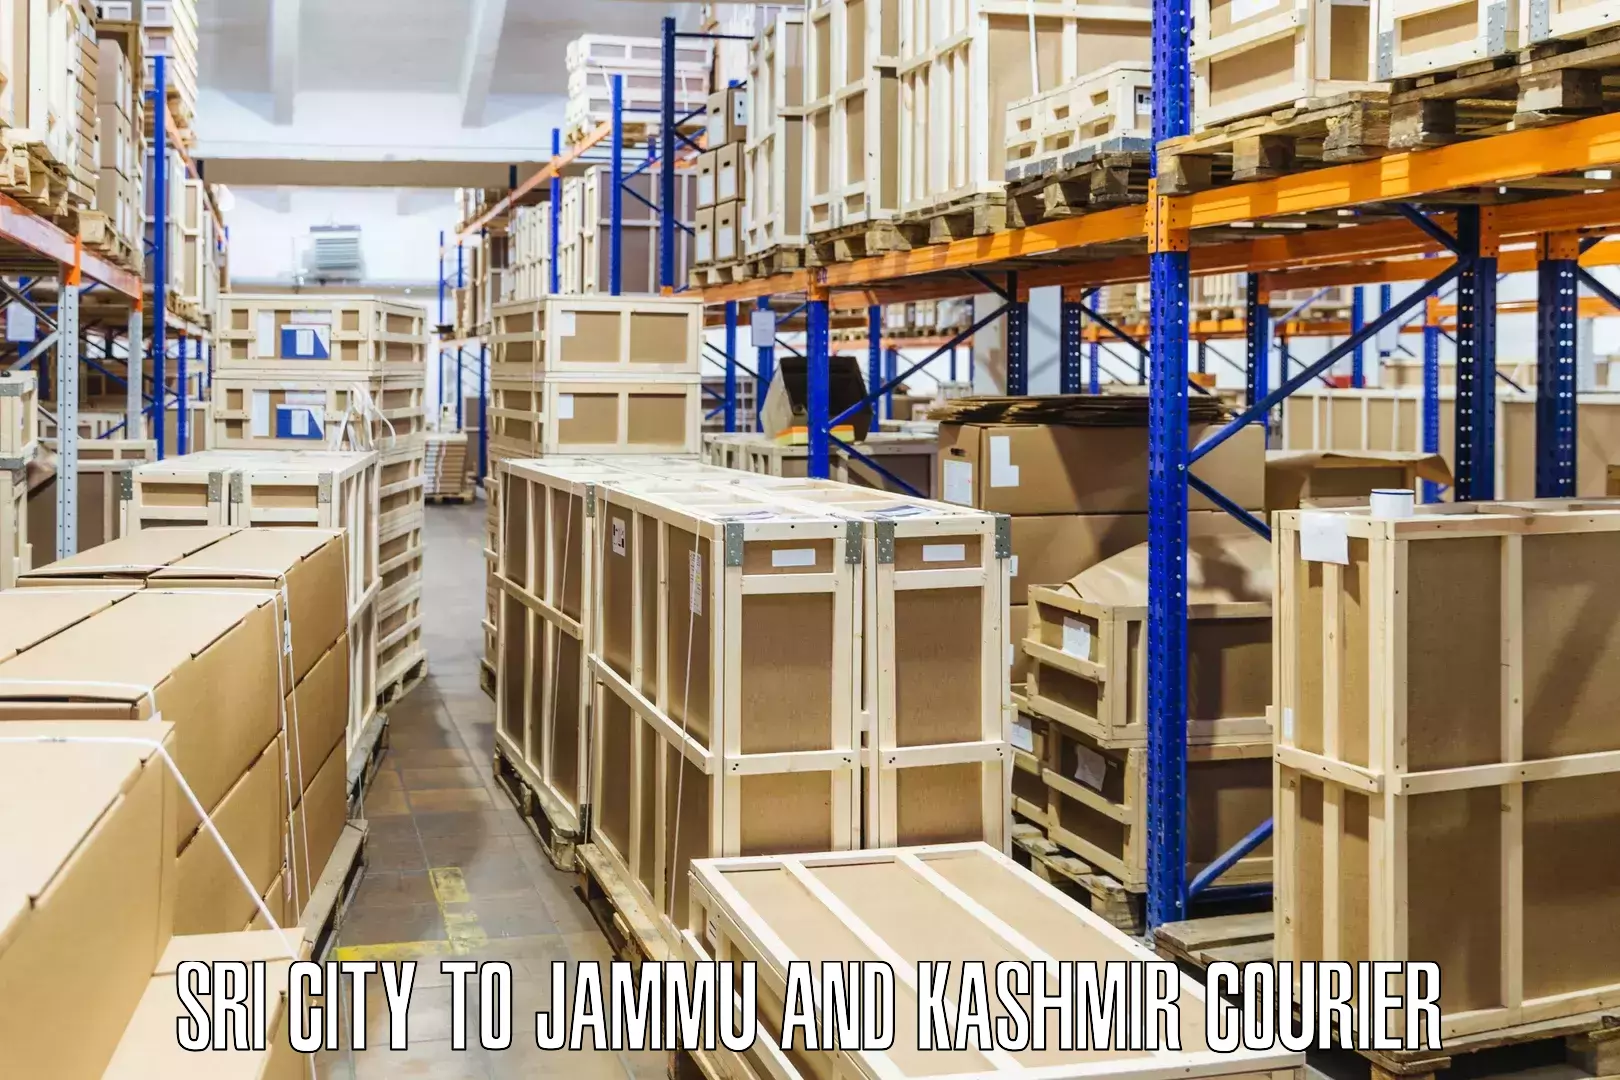 Courier dispatch services Sri City to Jammu and Kashmir